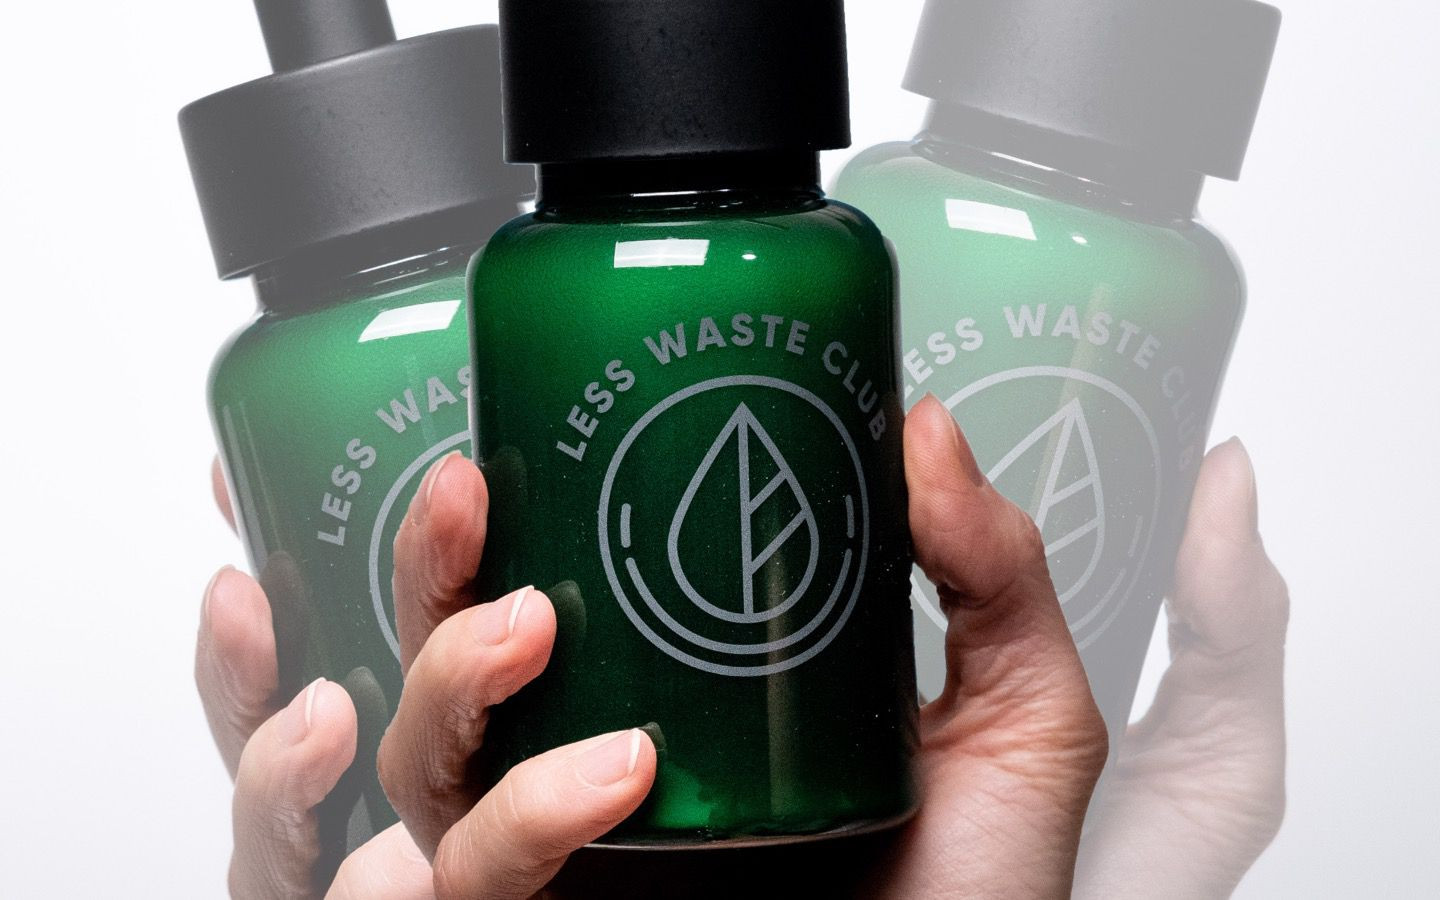 Less Waste Club Products